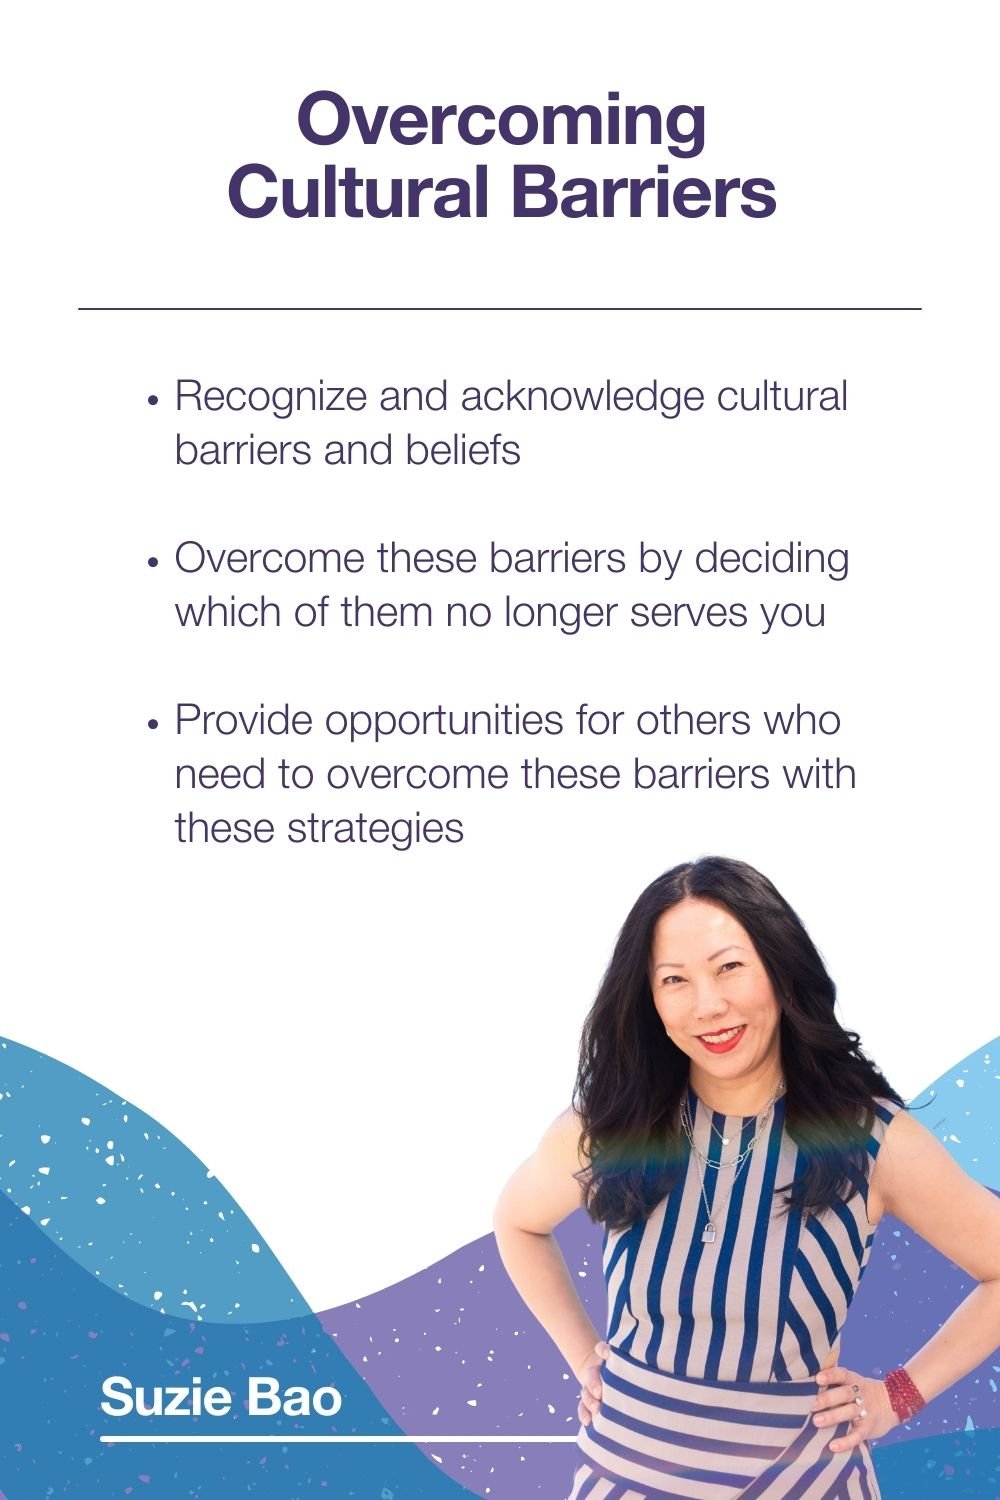 strategies to overcome cultural barriers